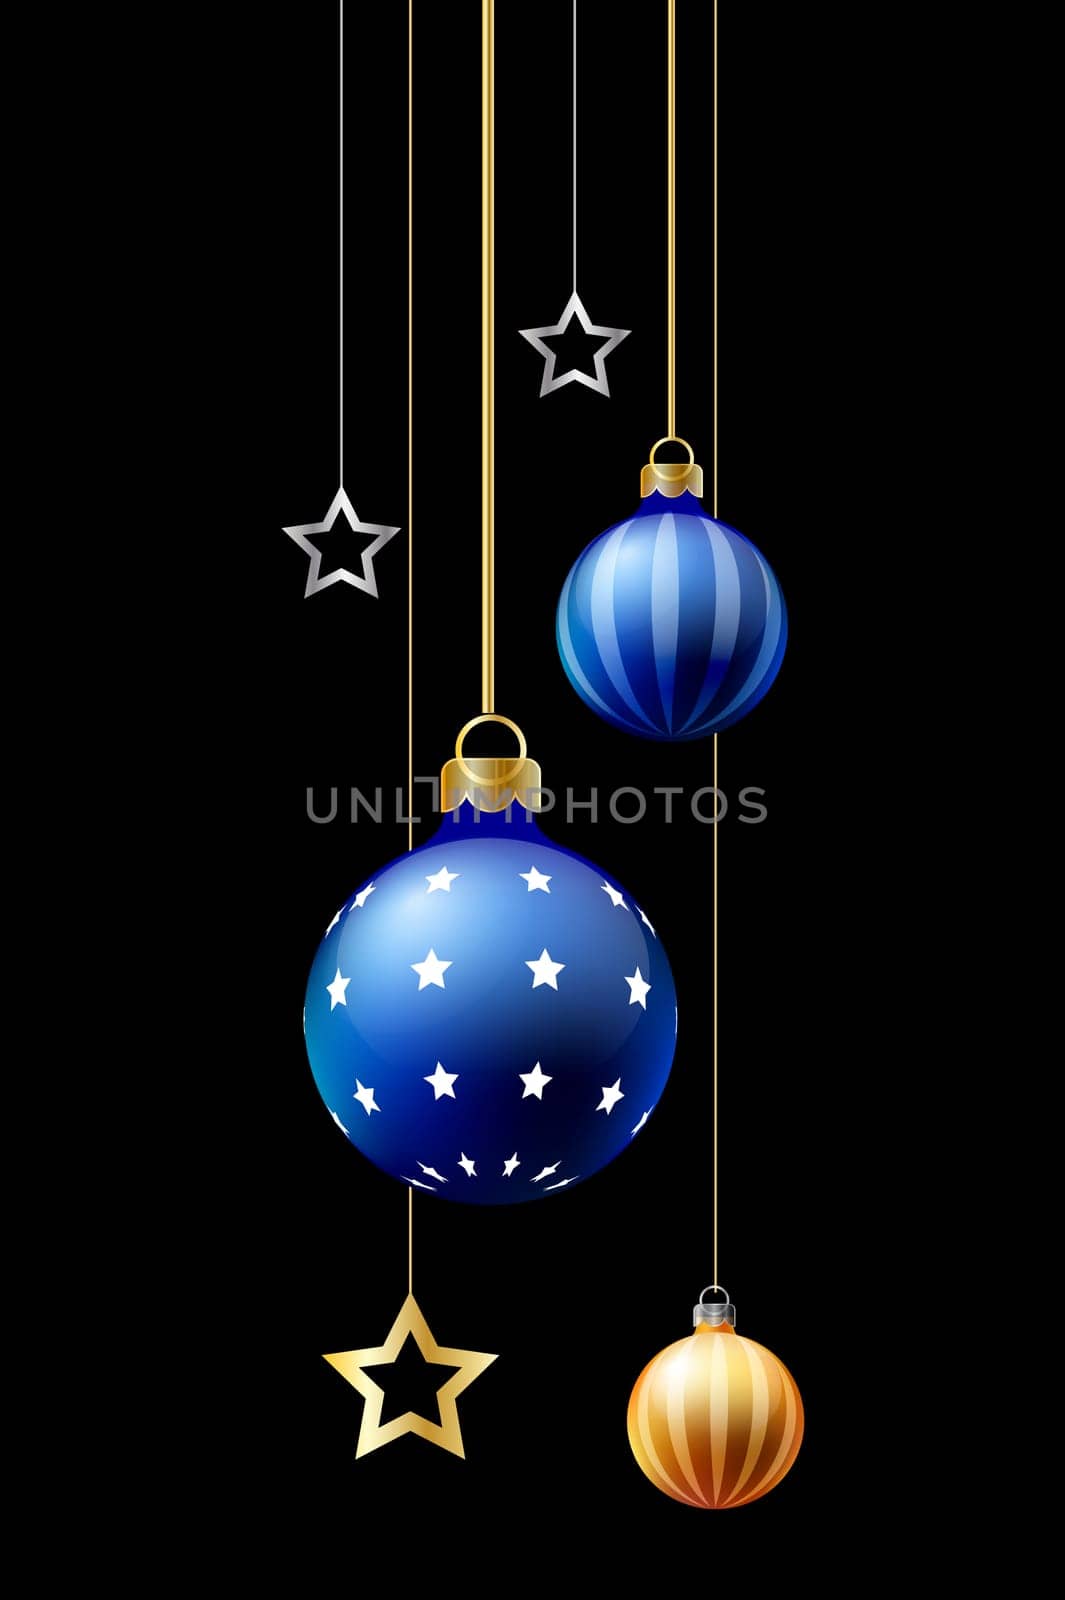 Merry Christmas frame ball on black background by sarayut_thaneerat